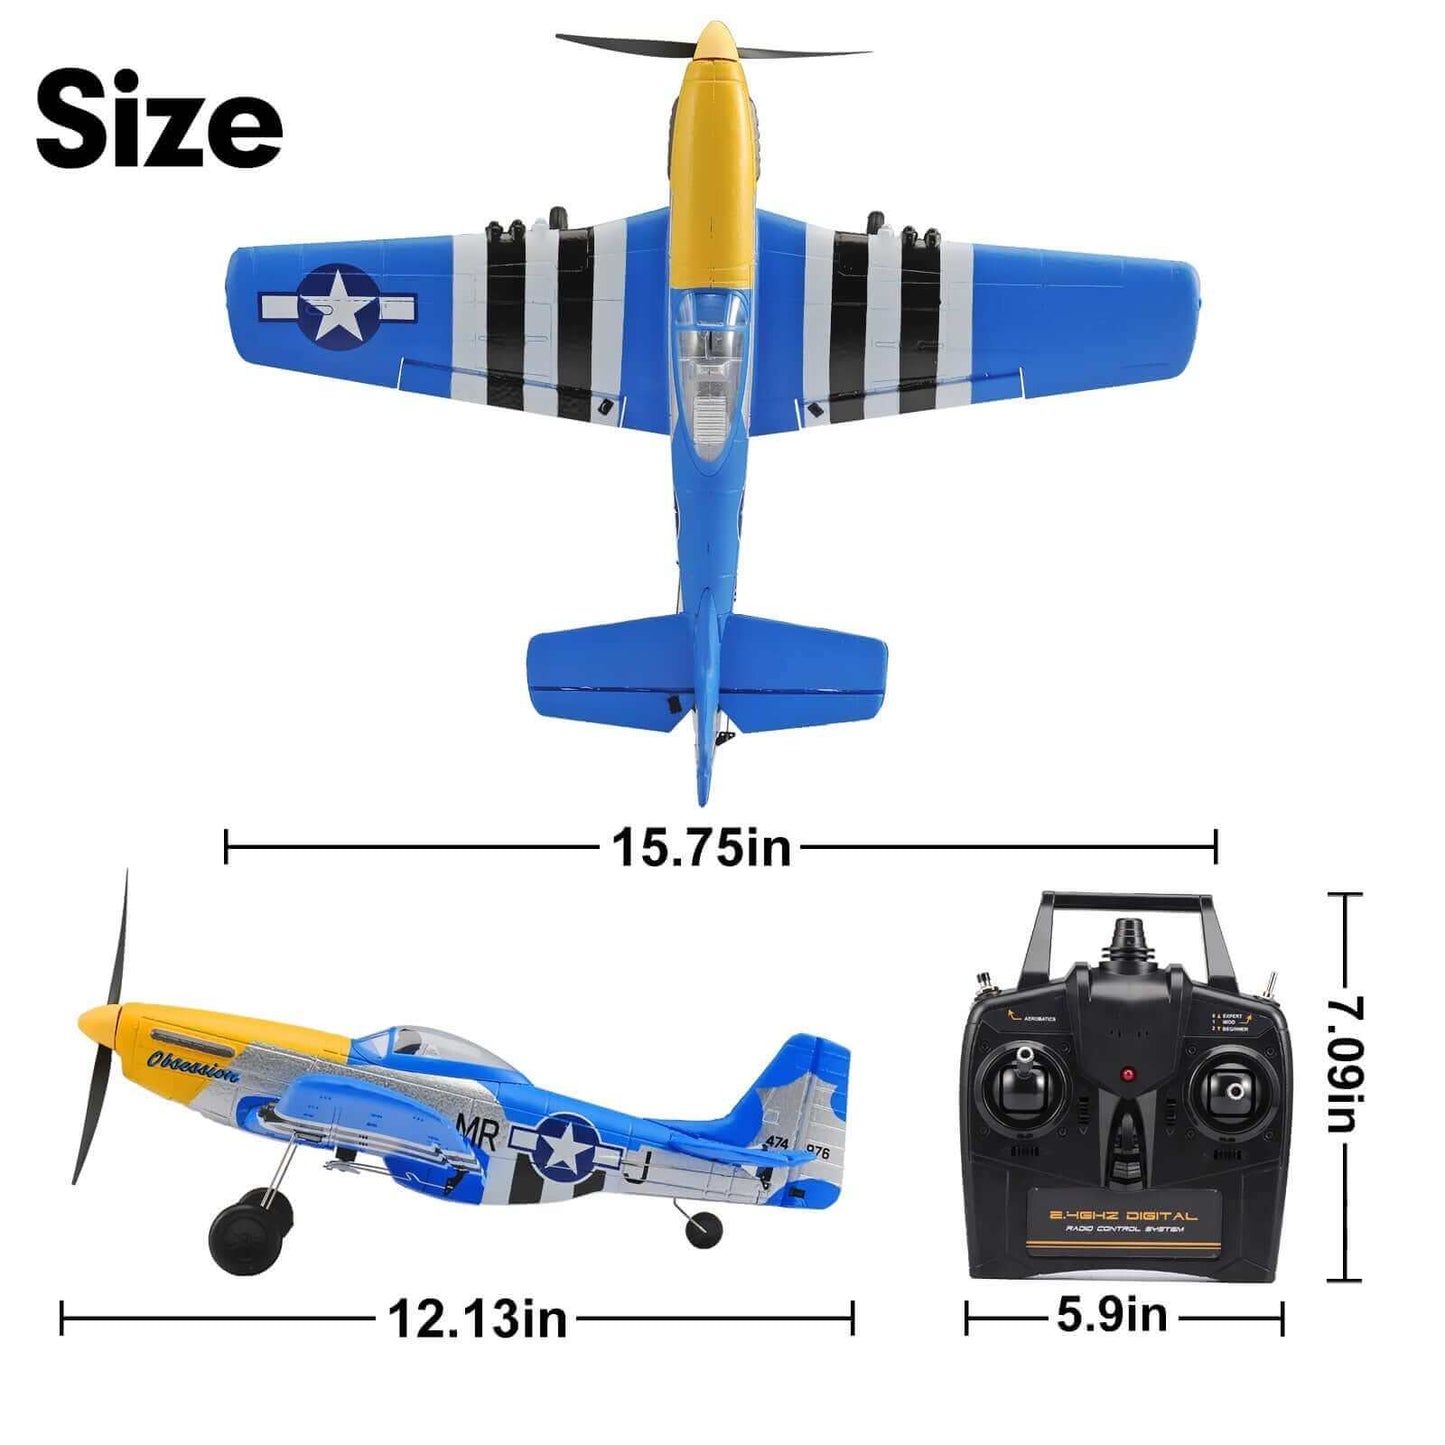 P51D Mustang size 